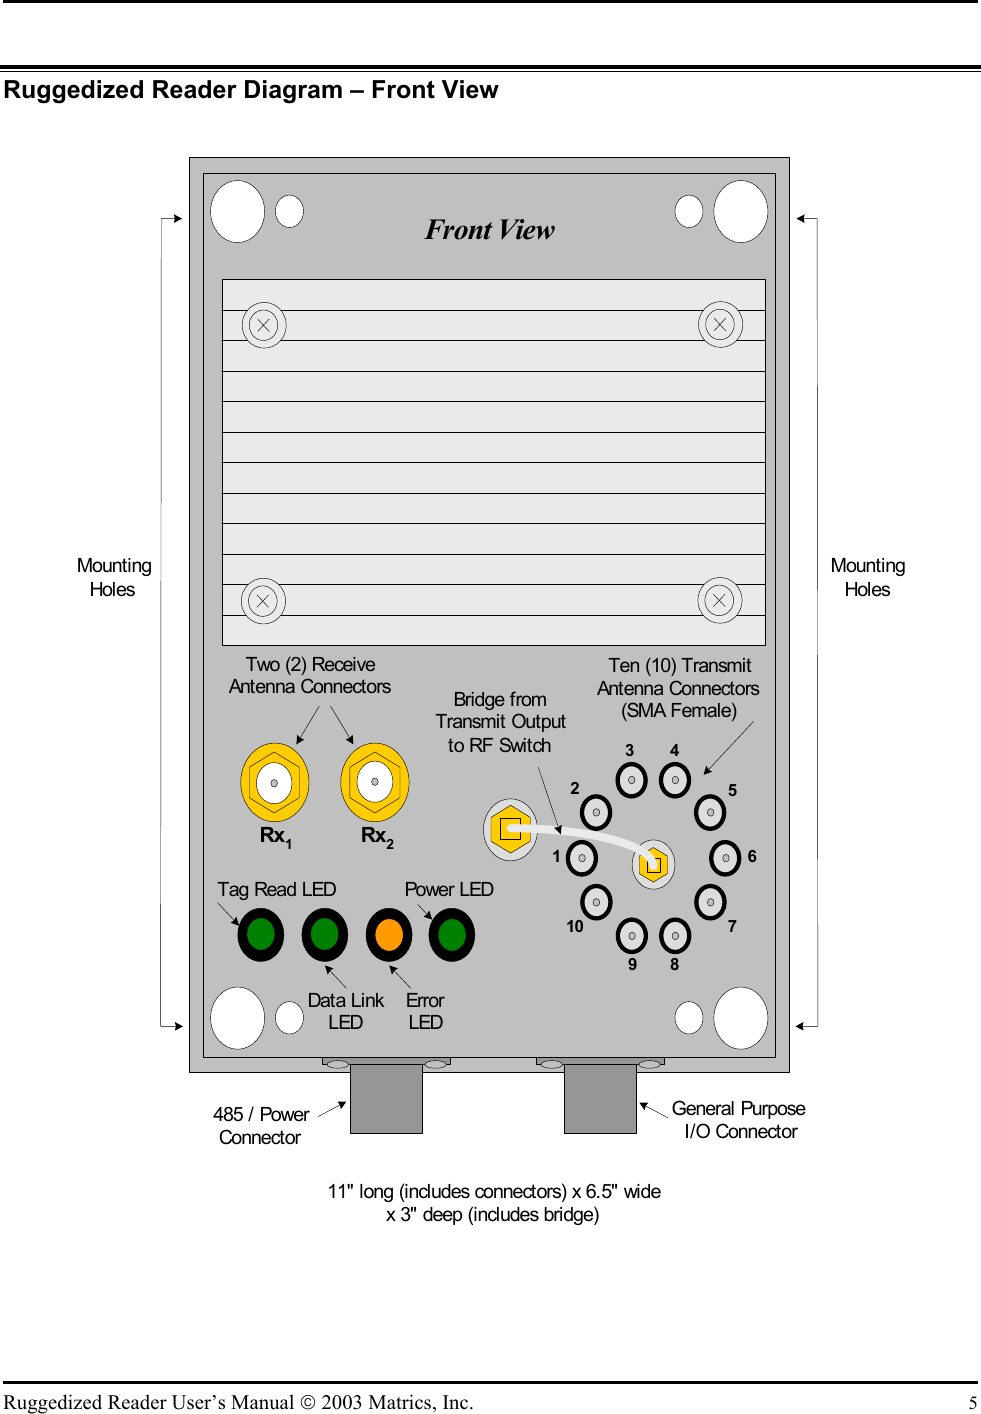  Ruggedized Reader Diagram – Front View  485 / PowerConnectorRx1Rx2Ten (10) TransmitAntenna Connectors(SMA Female)General PurposeI/O ConnectorTwo (2) ReceiveAntenna ConnectorsFront View11&quot; long (includes connectors) x 6.5&quot; widex 3&quot; deep (includes bridge)Data LinkLEDTag Read LEDErrorLEDBridge fromTransmit Outputto RF SwitchMountingHolesMountingHoles11092876345Power LED  Ruggedized Reader User’s Manual  2003 Matrics, Inc.  5 